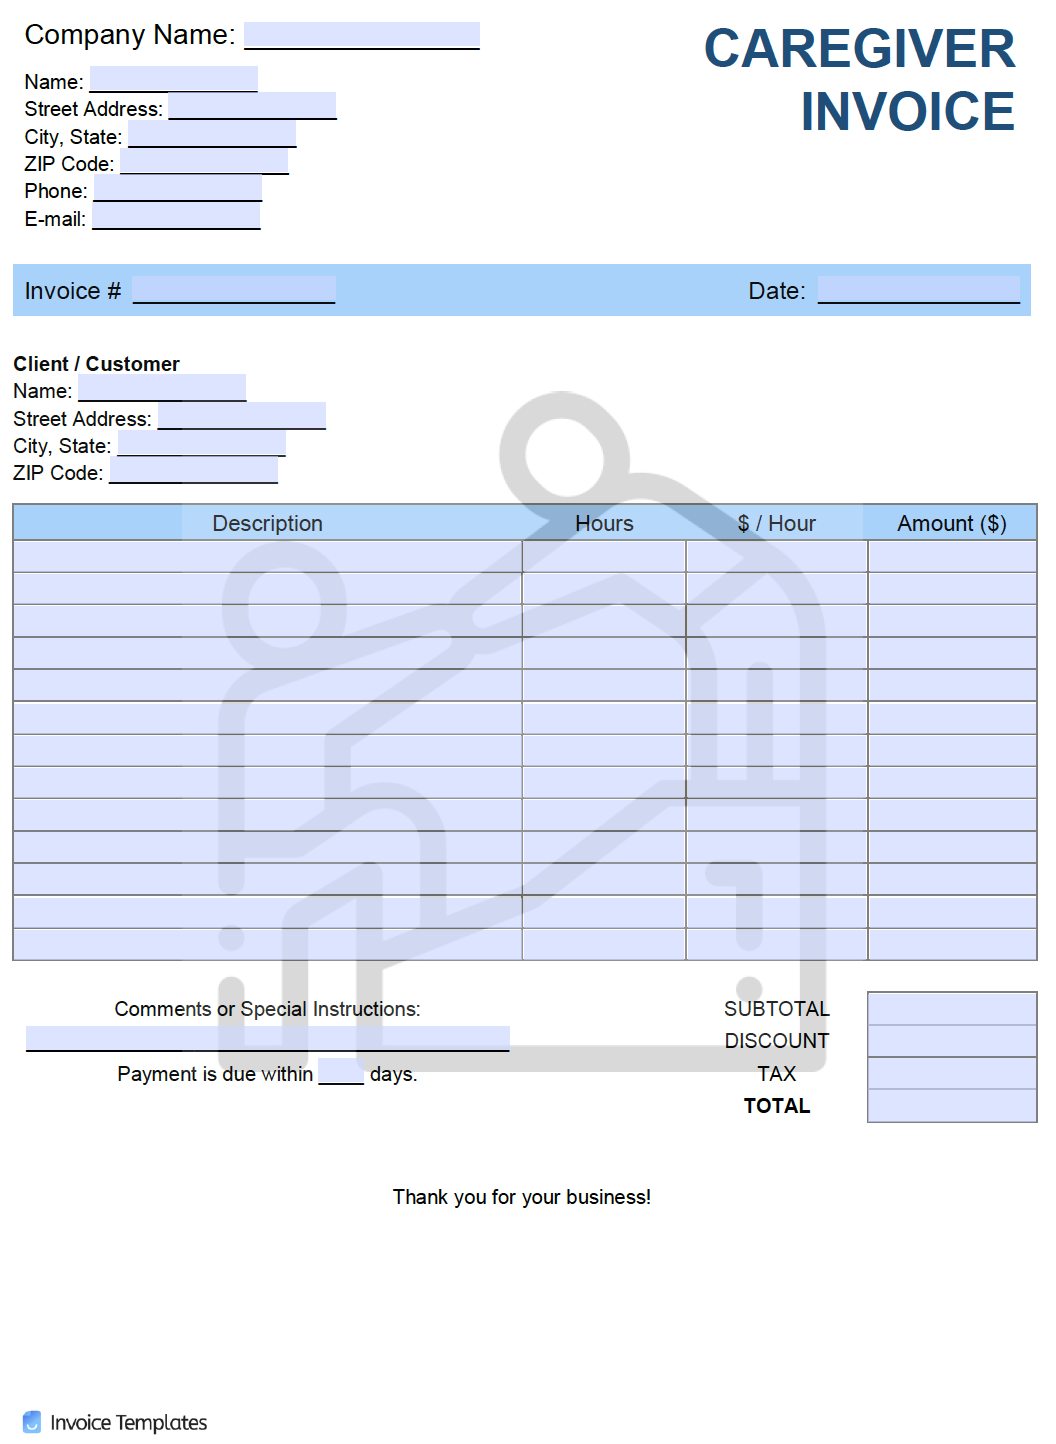 Free Caregiver Invoice Template  PDF  WORD  EXCEL With Home Health Care Invoice Template